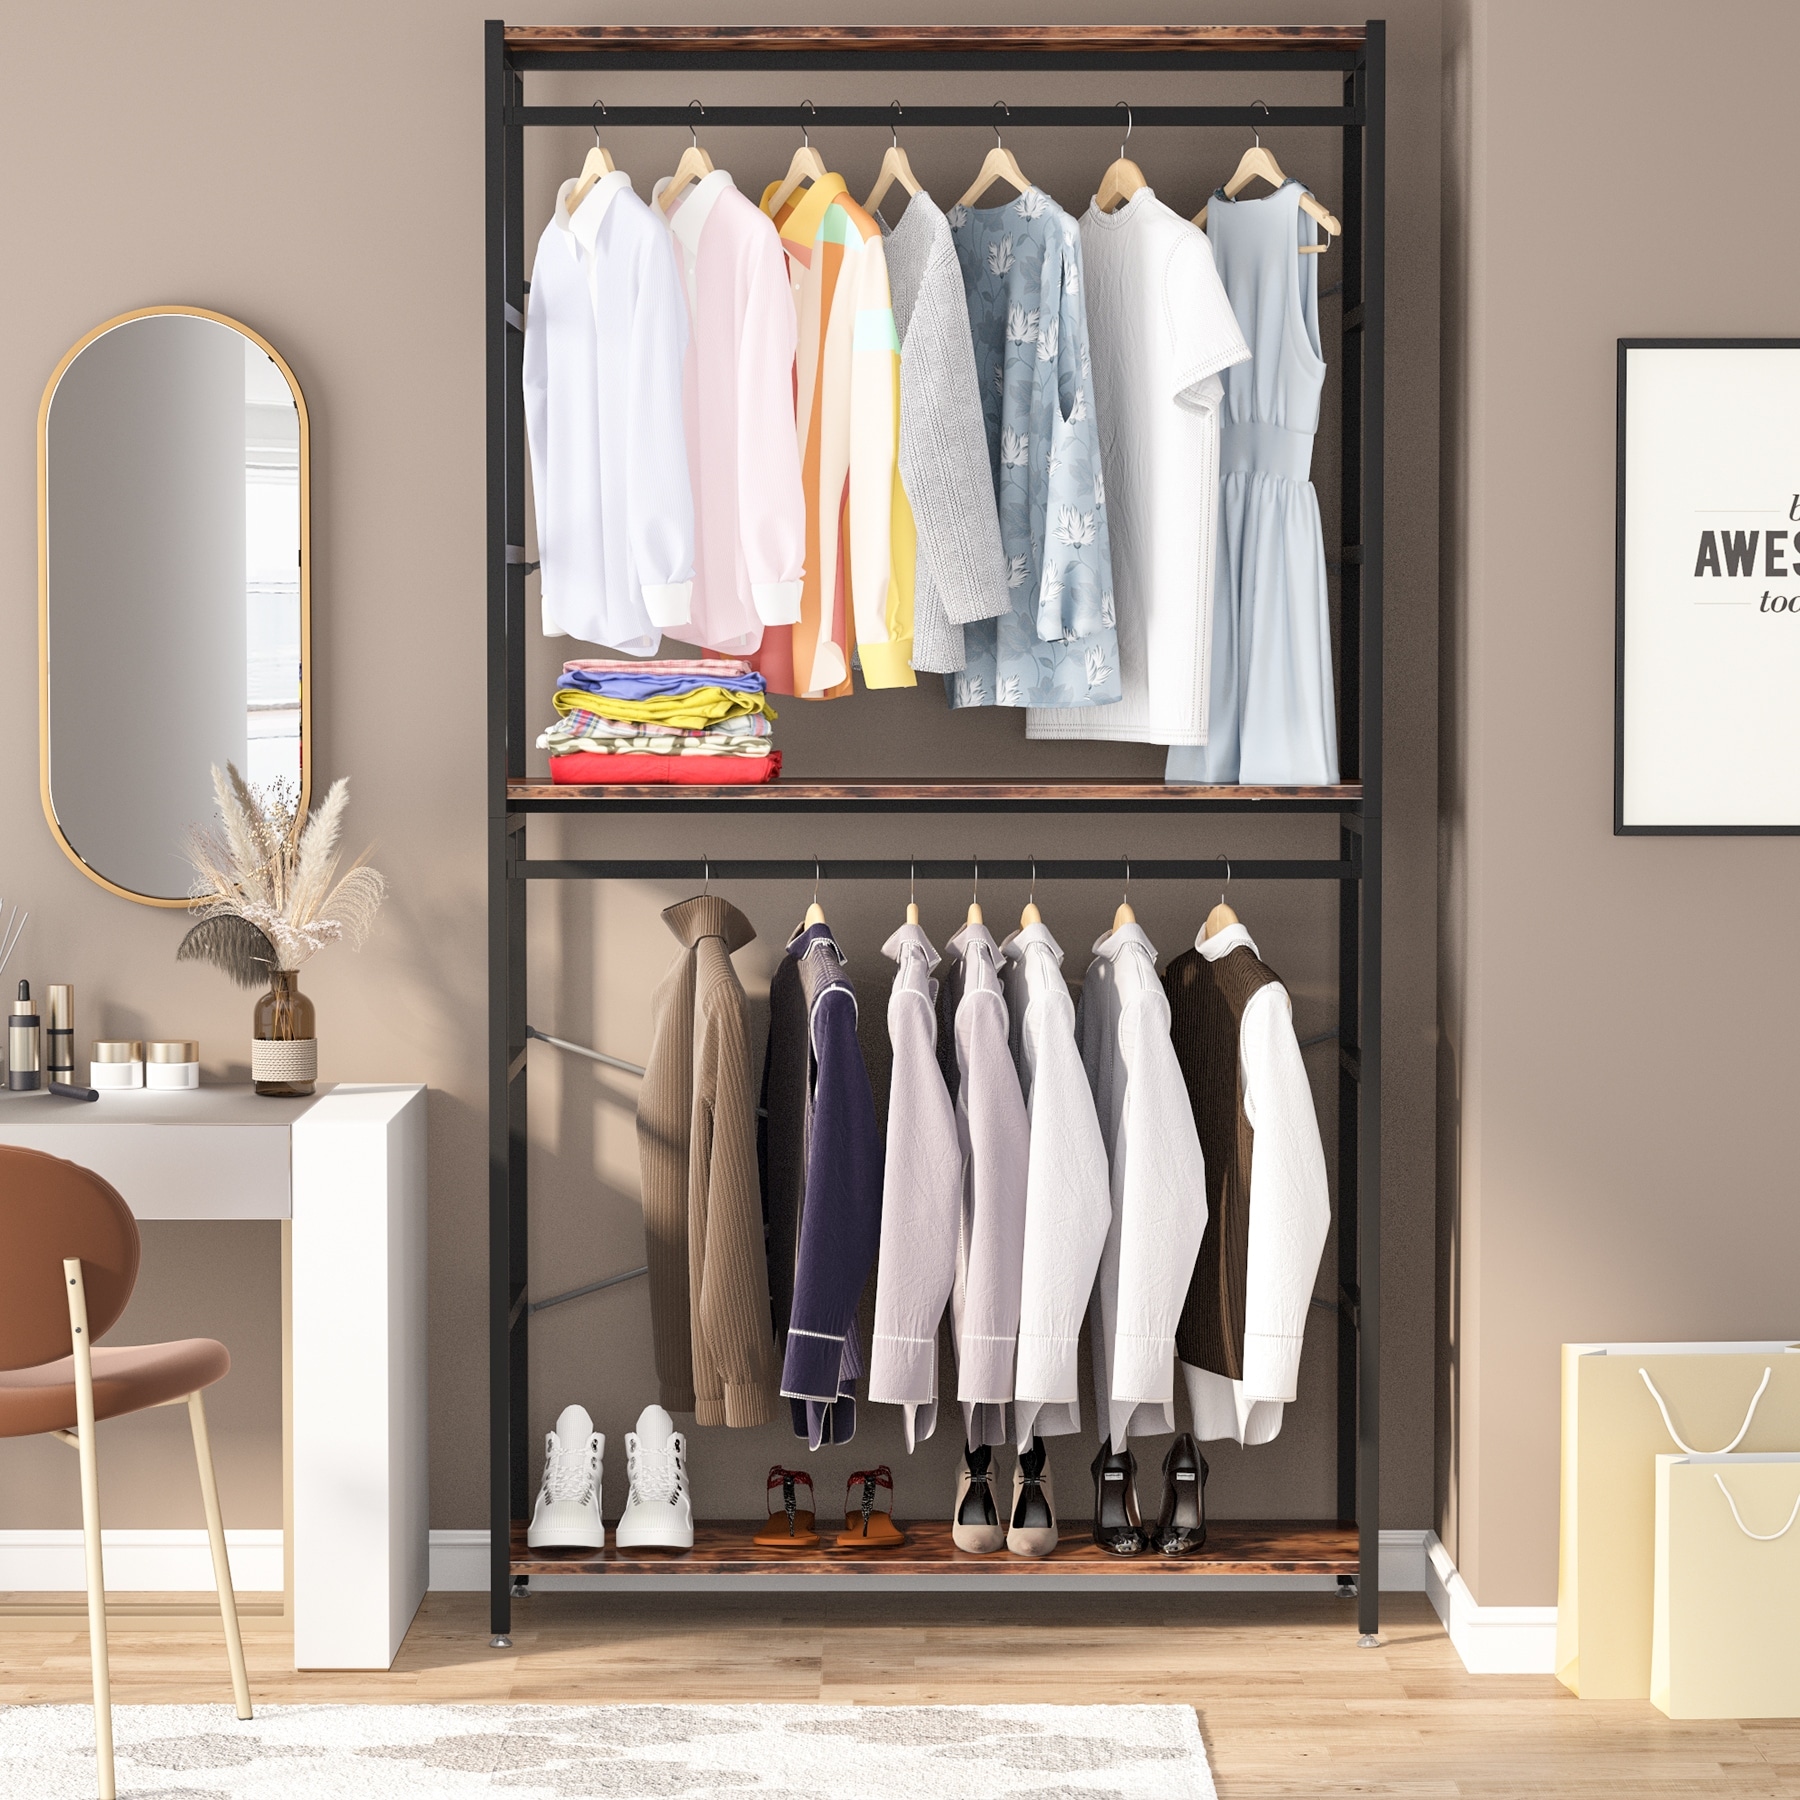 https://ak1.ostkcdn.com/images/products/is/images/direct/31a1609af7bd5e4c3e0119dc69401dba9a41112b/Extra-tall-47-inches-Double-Rod-Closet-Shelf-Freestanding-3-Shelves-Clothes-Clothing-Garment-Racks.jpg